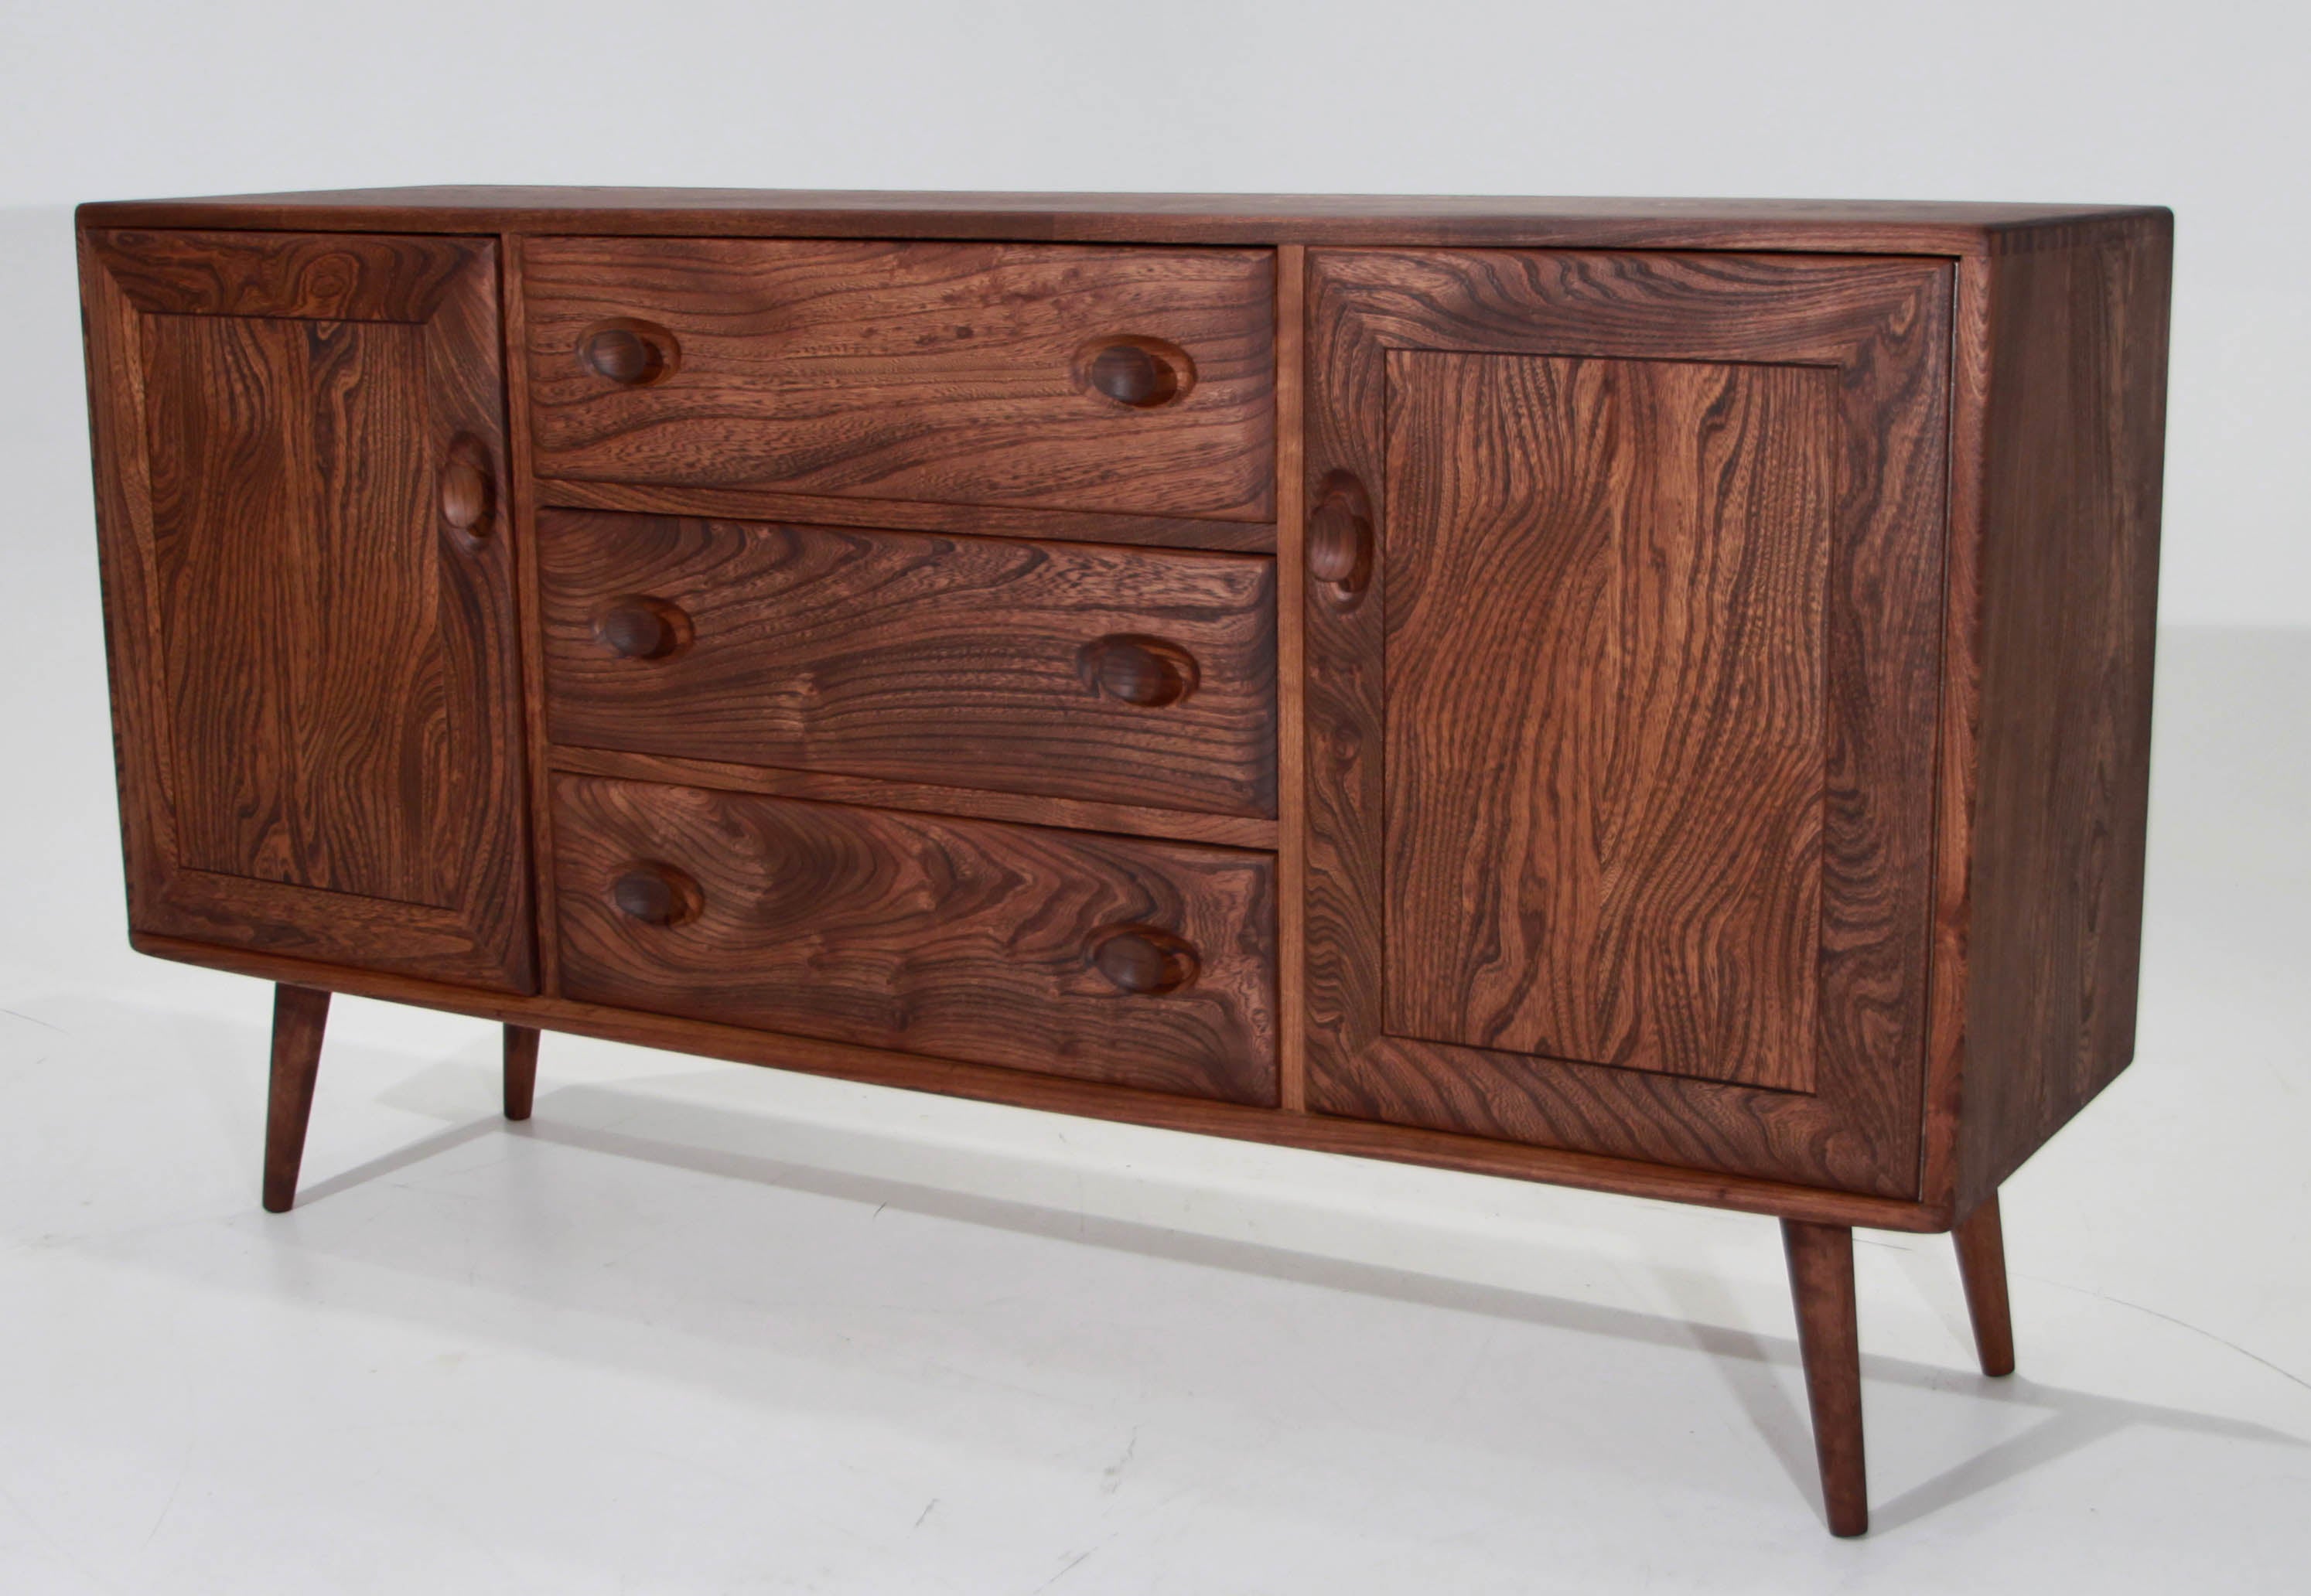 Cabinet by Lucian Ercolani for Ercol, London